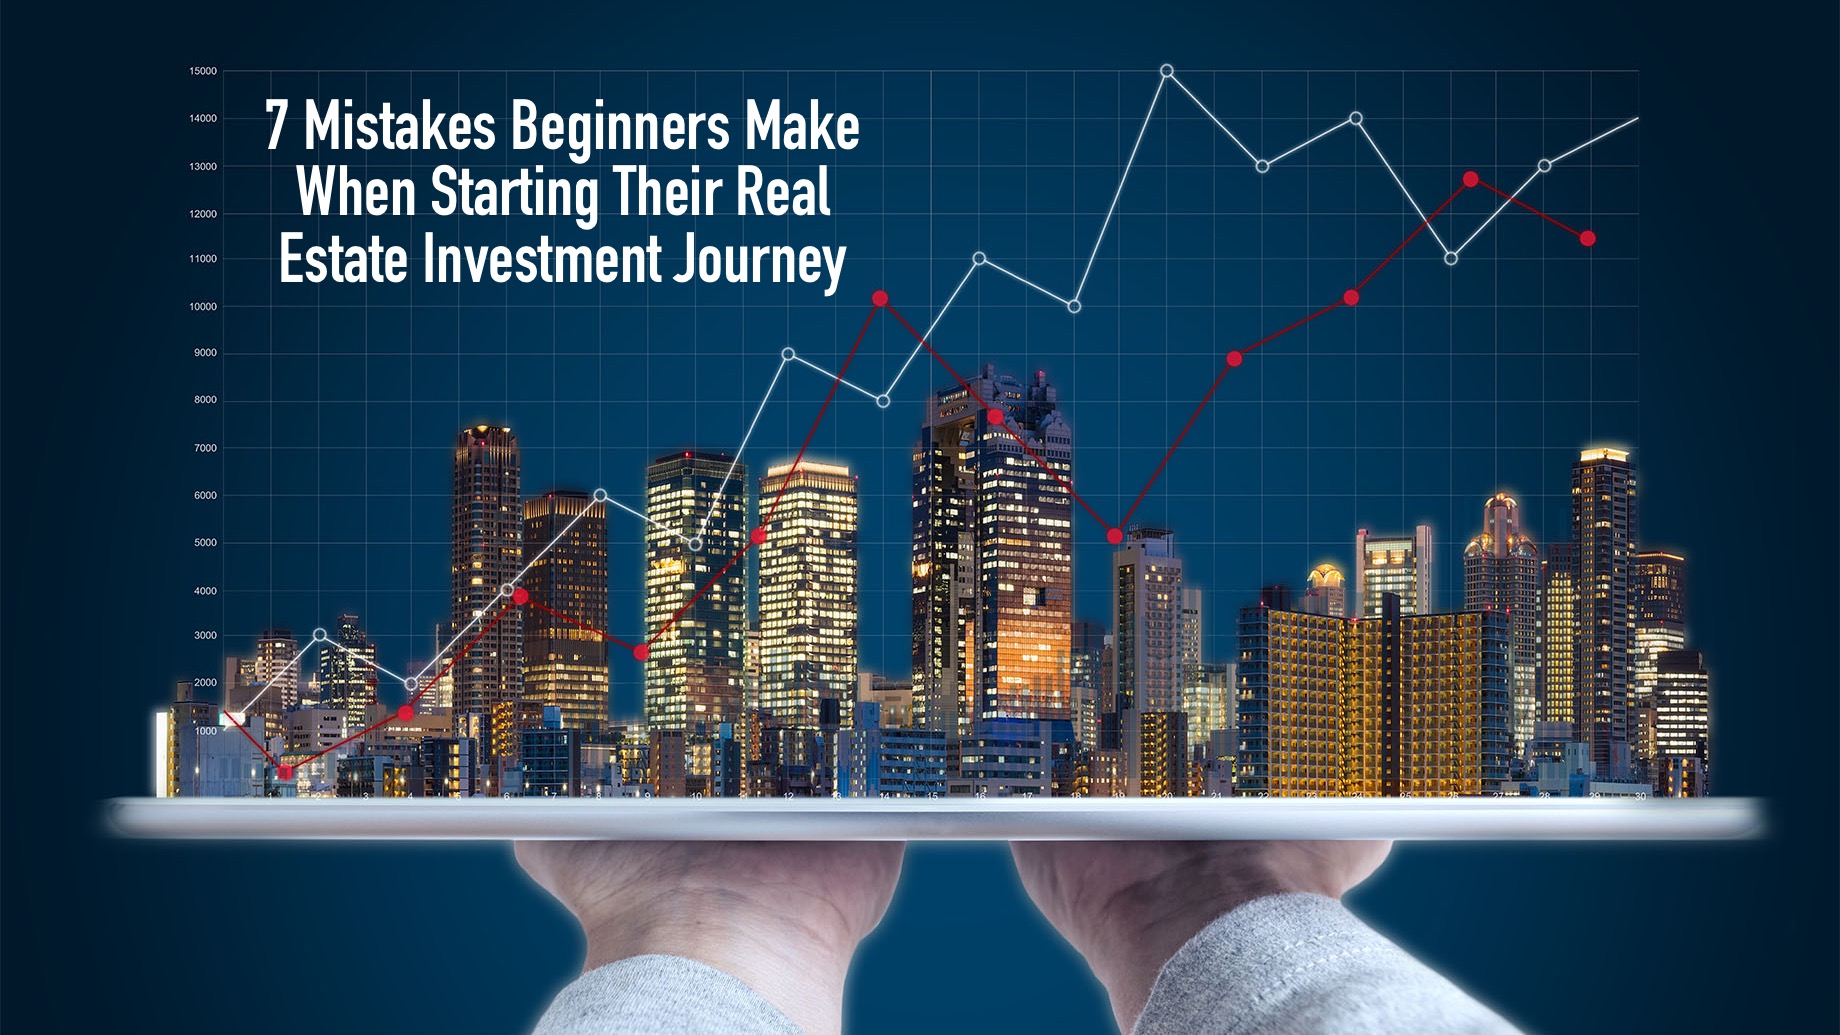 7 Mistakes Beginners Make When Starting Their Real Estate Investment Journey